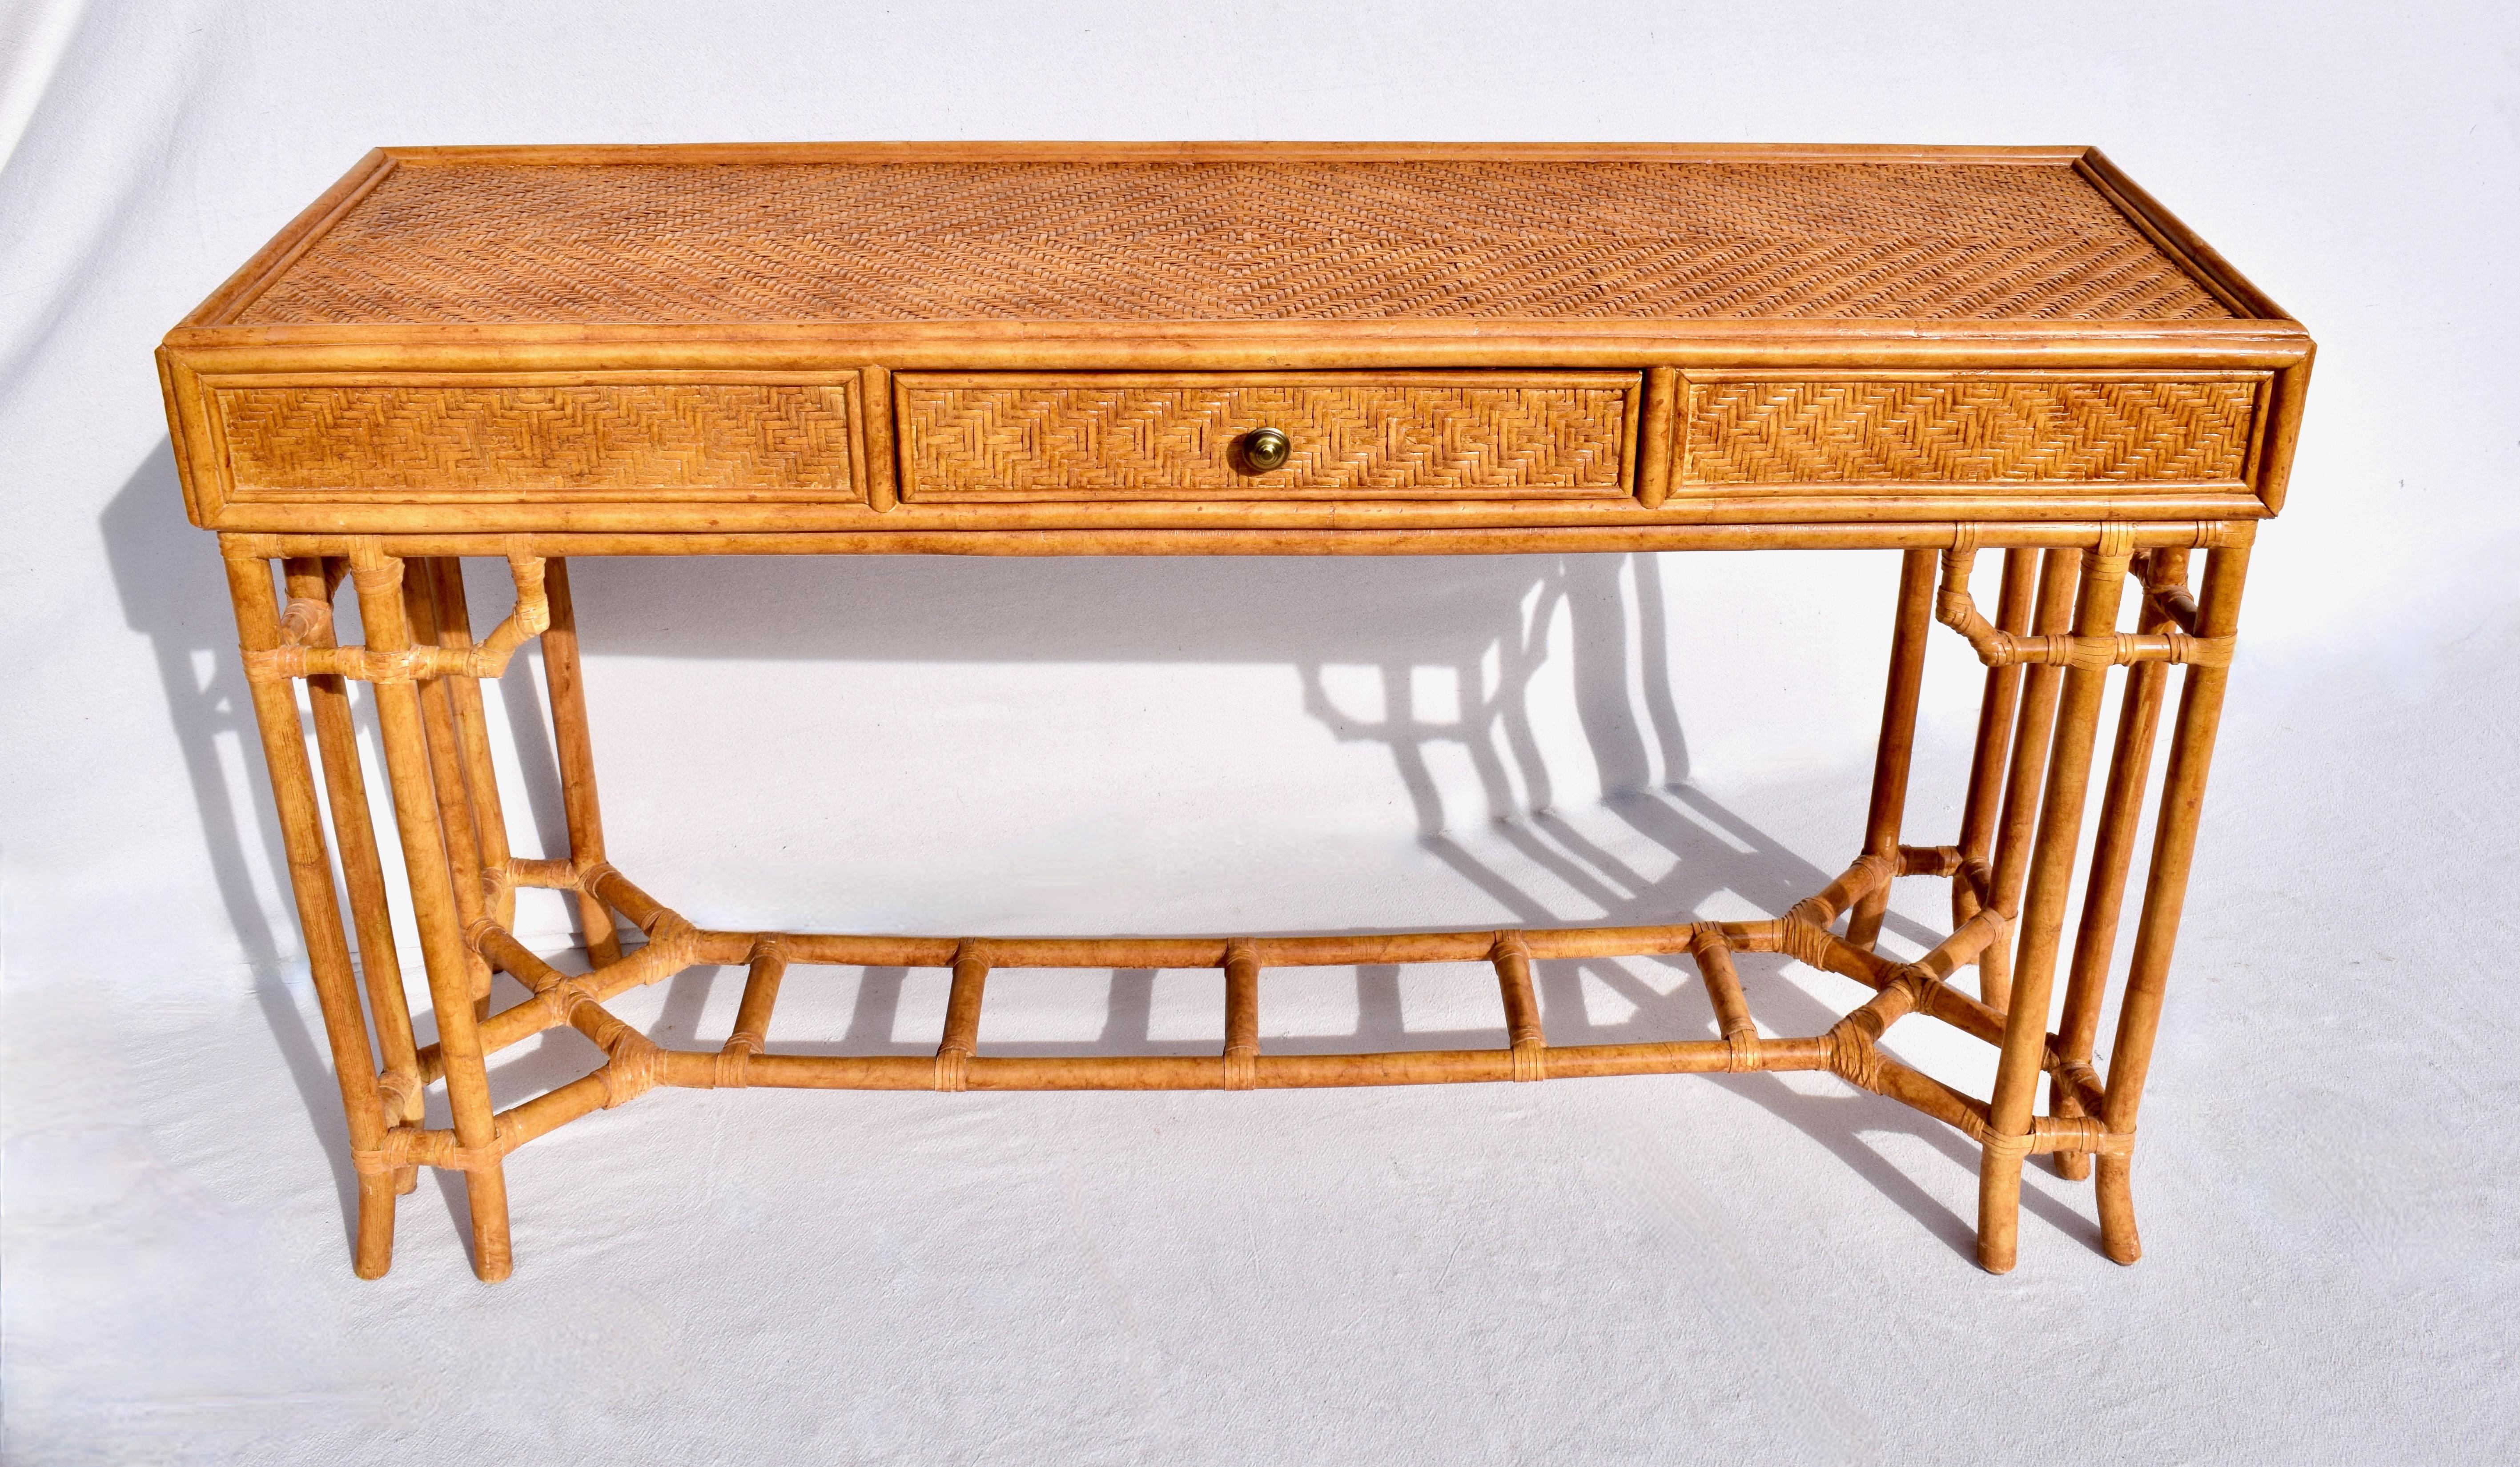 midcentury British Colonial Campaign style single drawer console or work table with distinct Chinese Chippendale design elements. Bamboo frame construction wrapped in woven cane rattan grass cloth & rawhide leather joinery features generous work